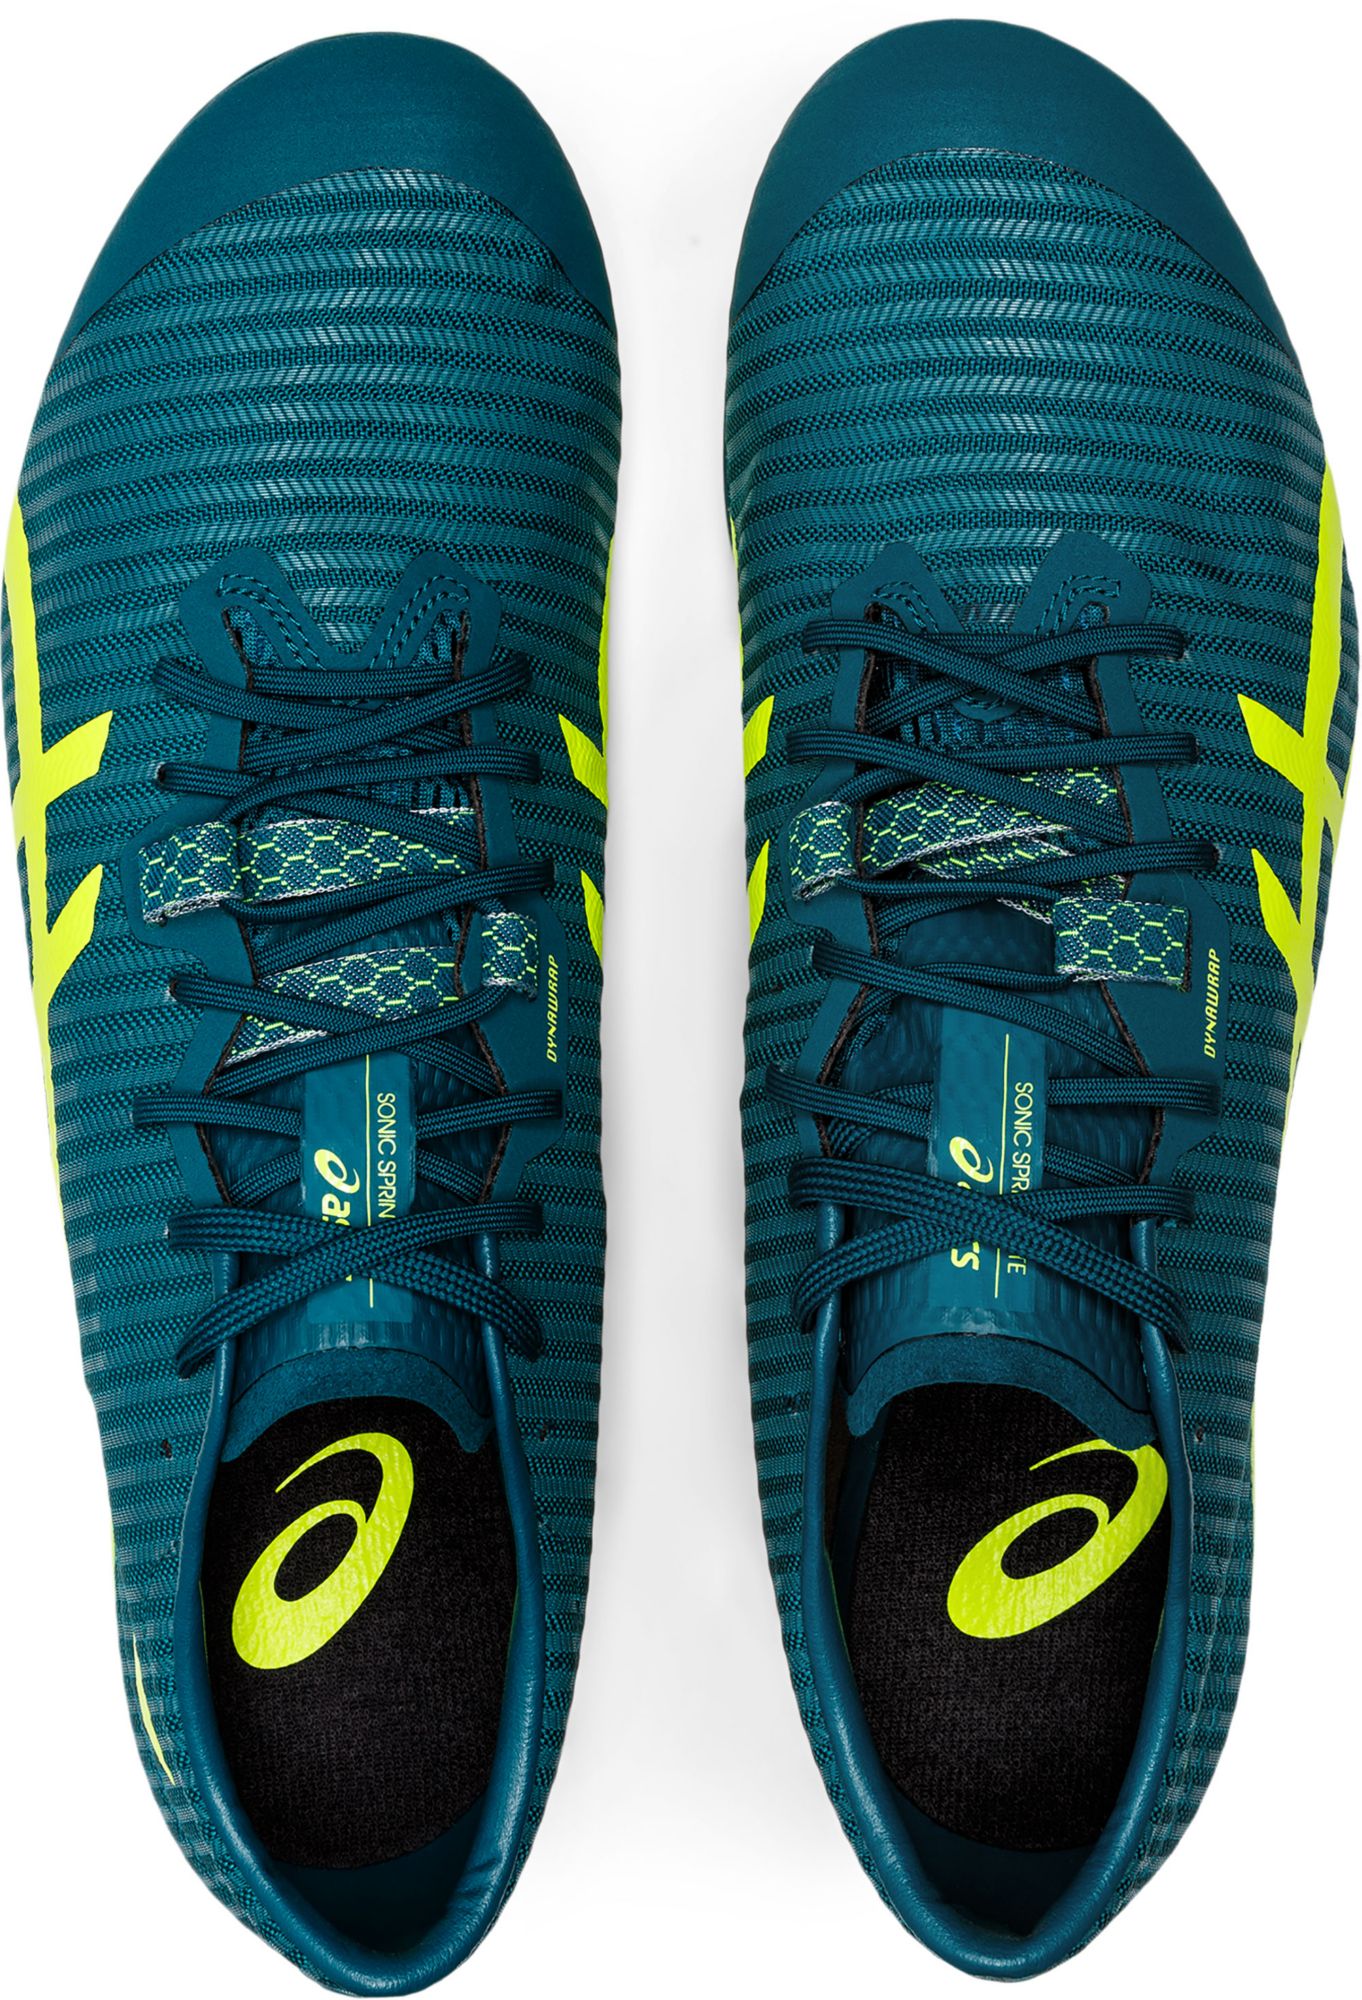 ASICS Sonicsprint Elite 2 Track and Field Shoes